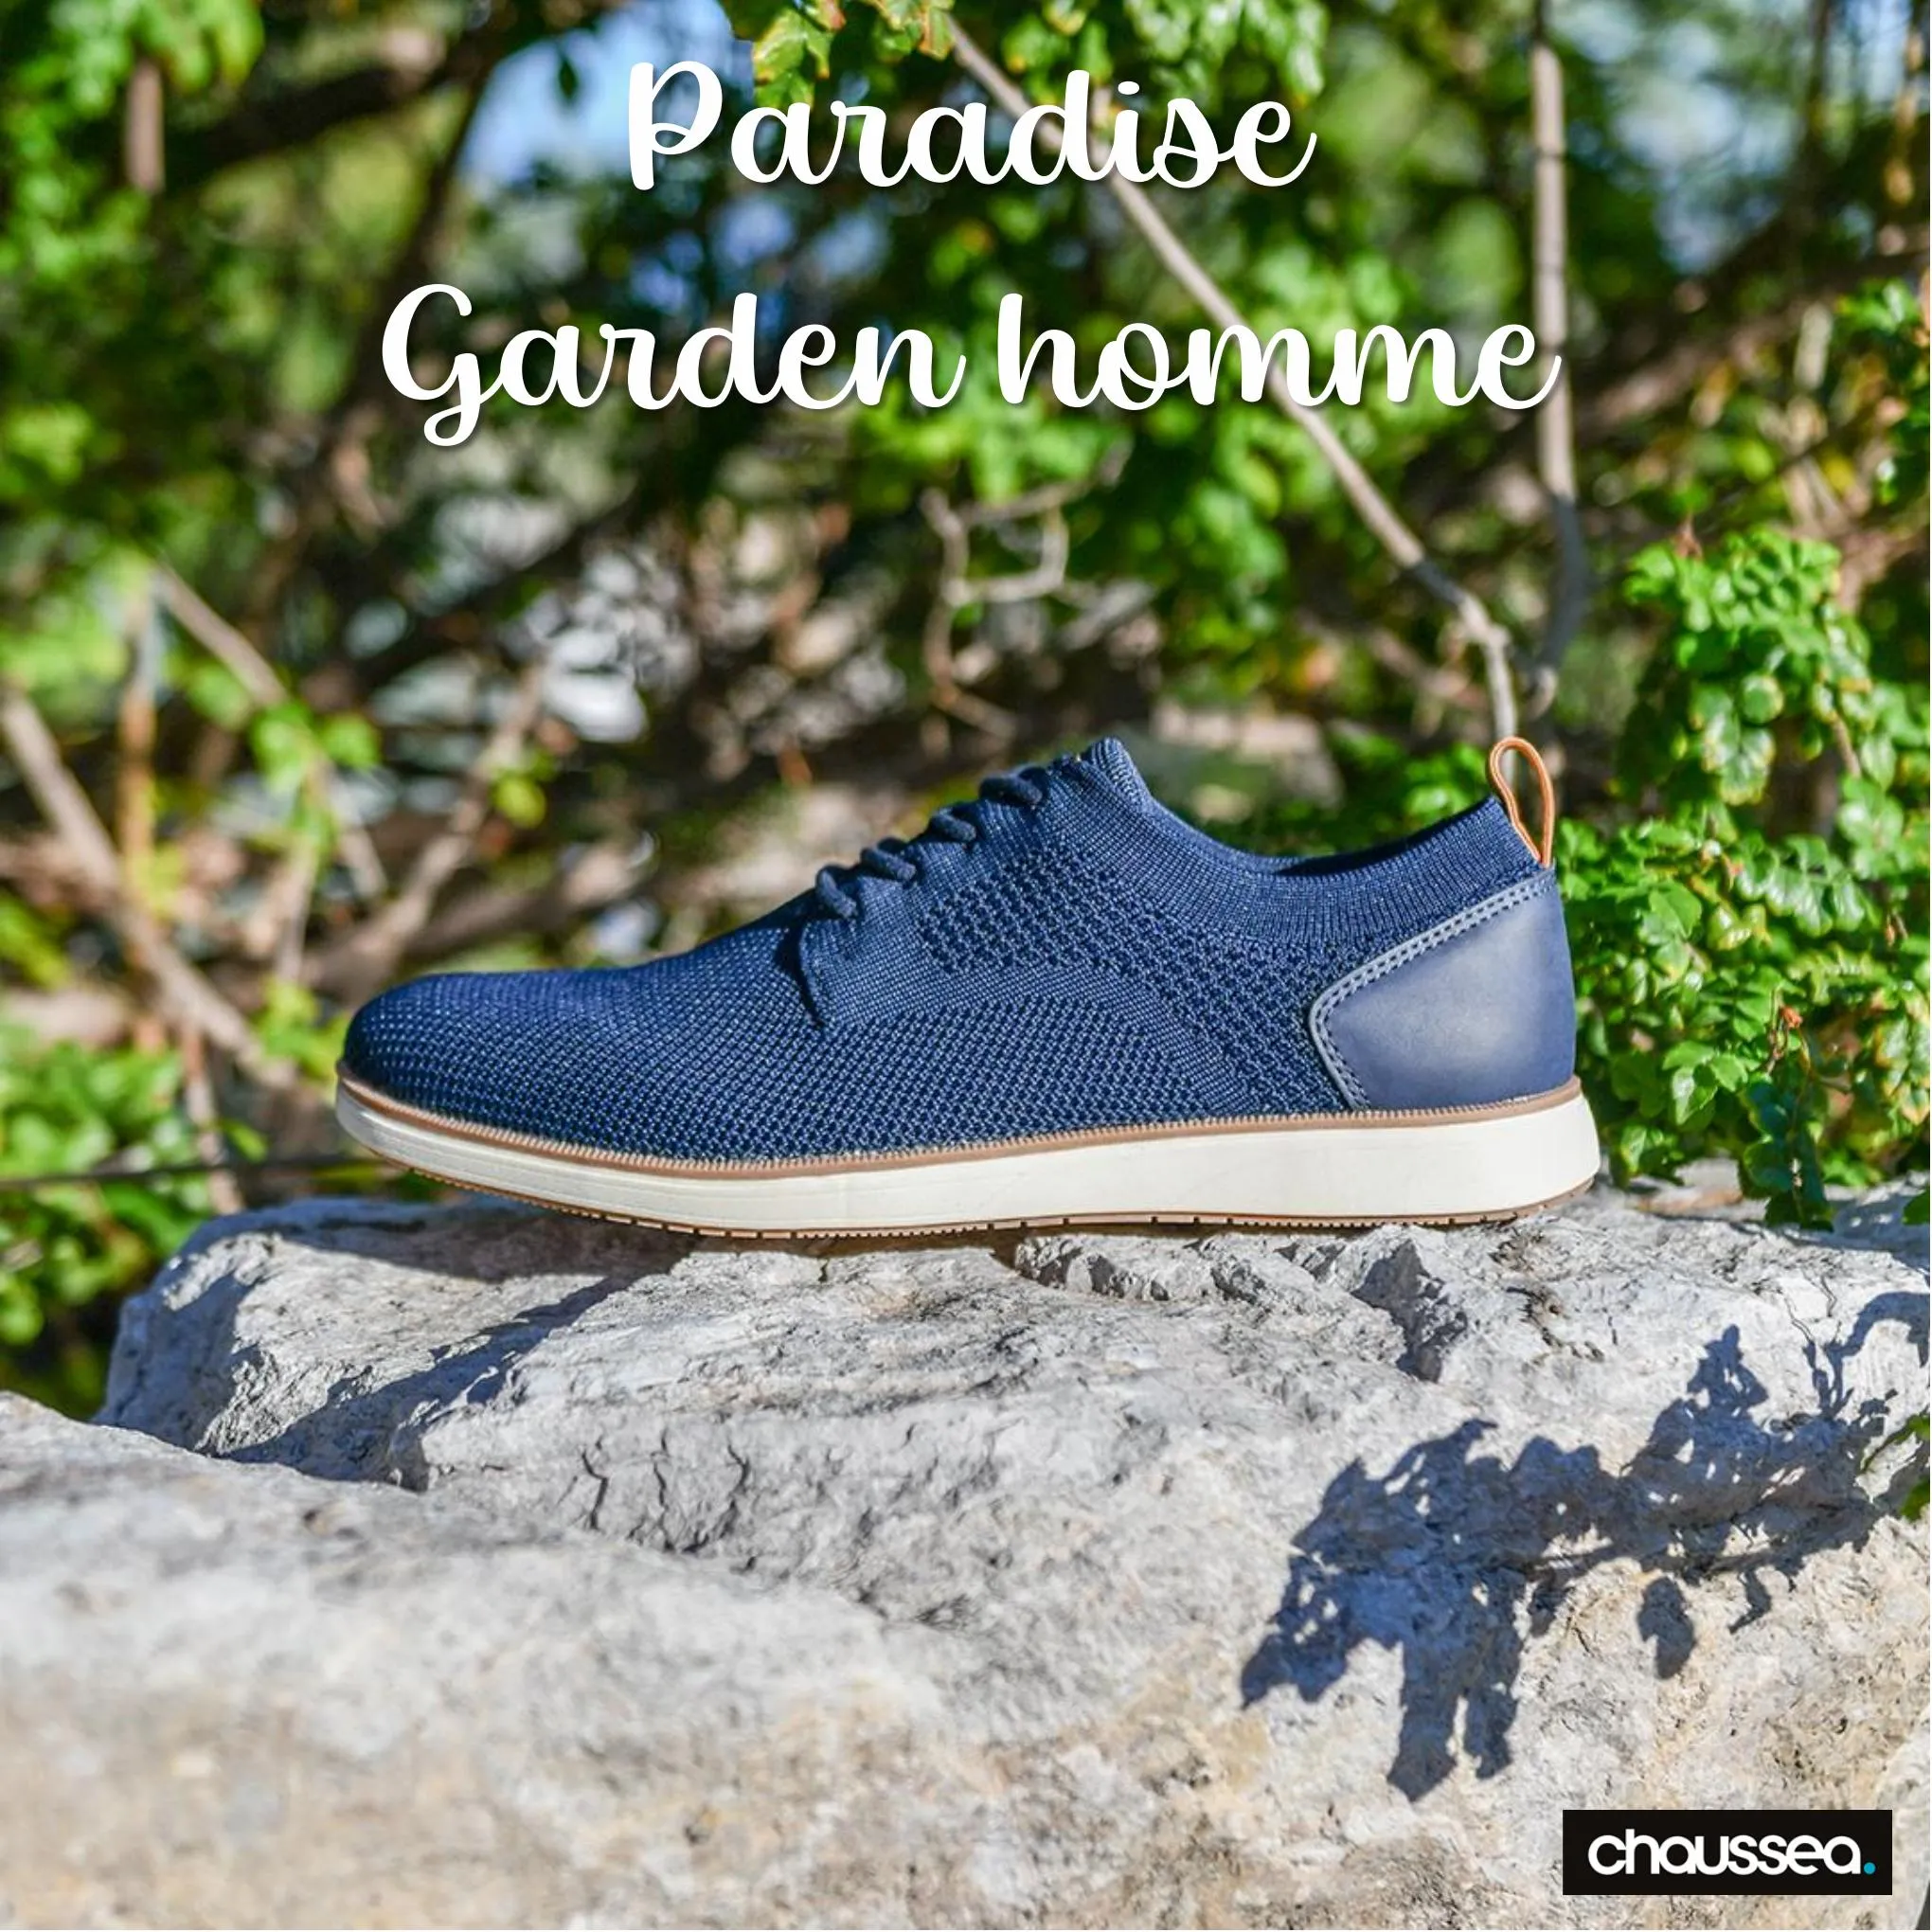 Catalogue PARADISE GARDEN HOMME, page 00001